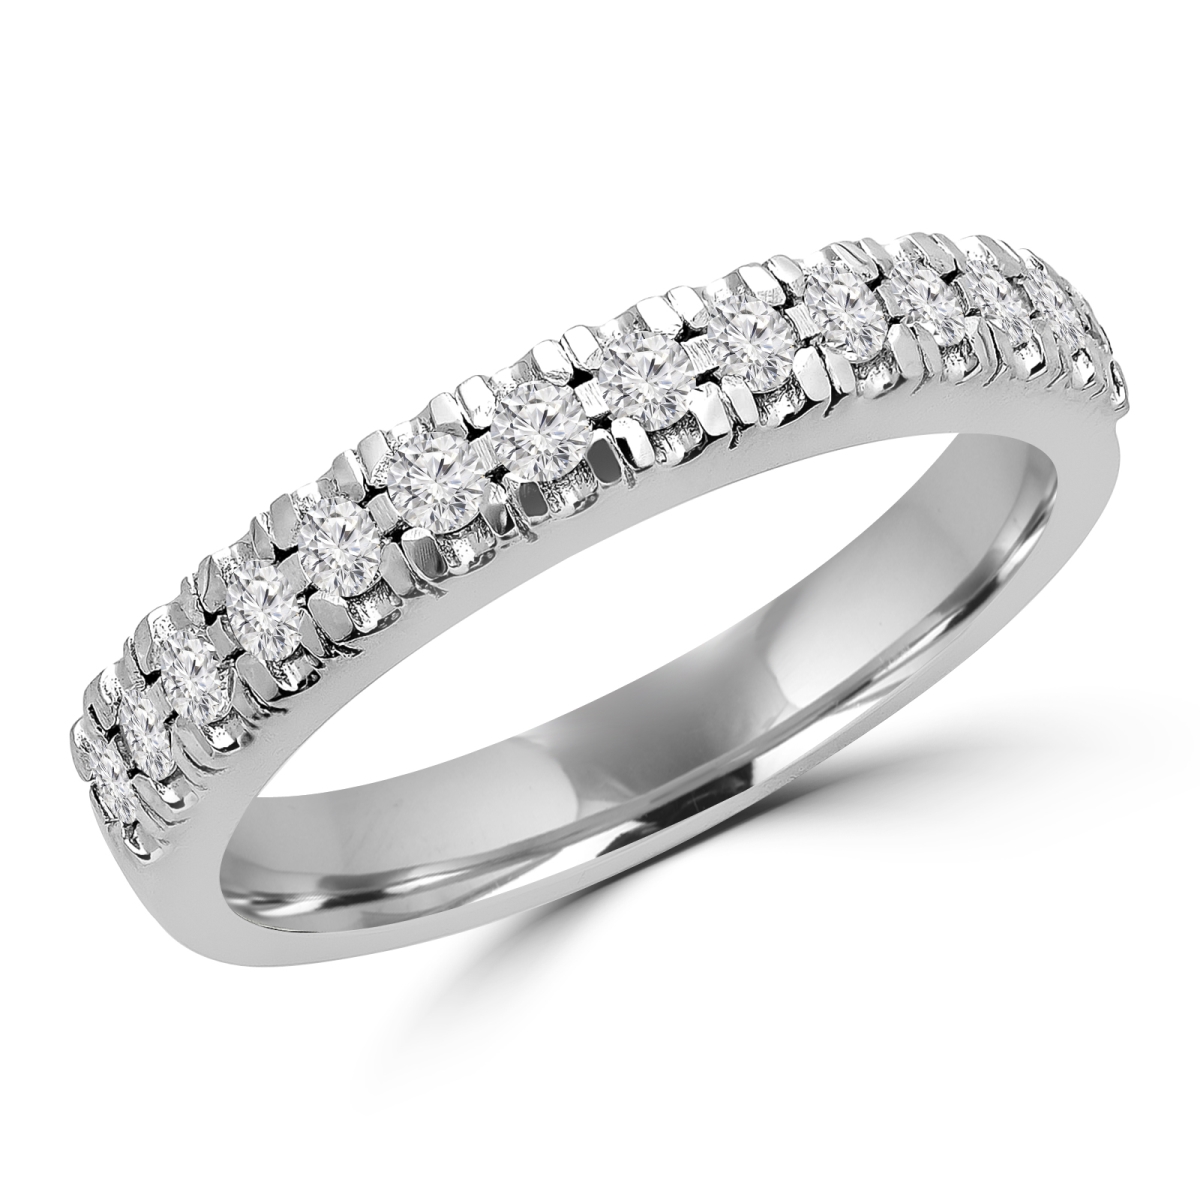 Picture of Majesty Diamonds MD170257-8.25 0.33 CTW Round Diamond Semi-Eternity Wedding Band Ring in 14K White Gold - Size 8.25